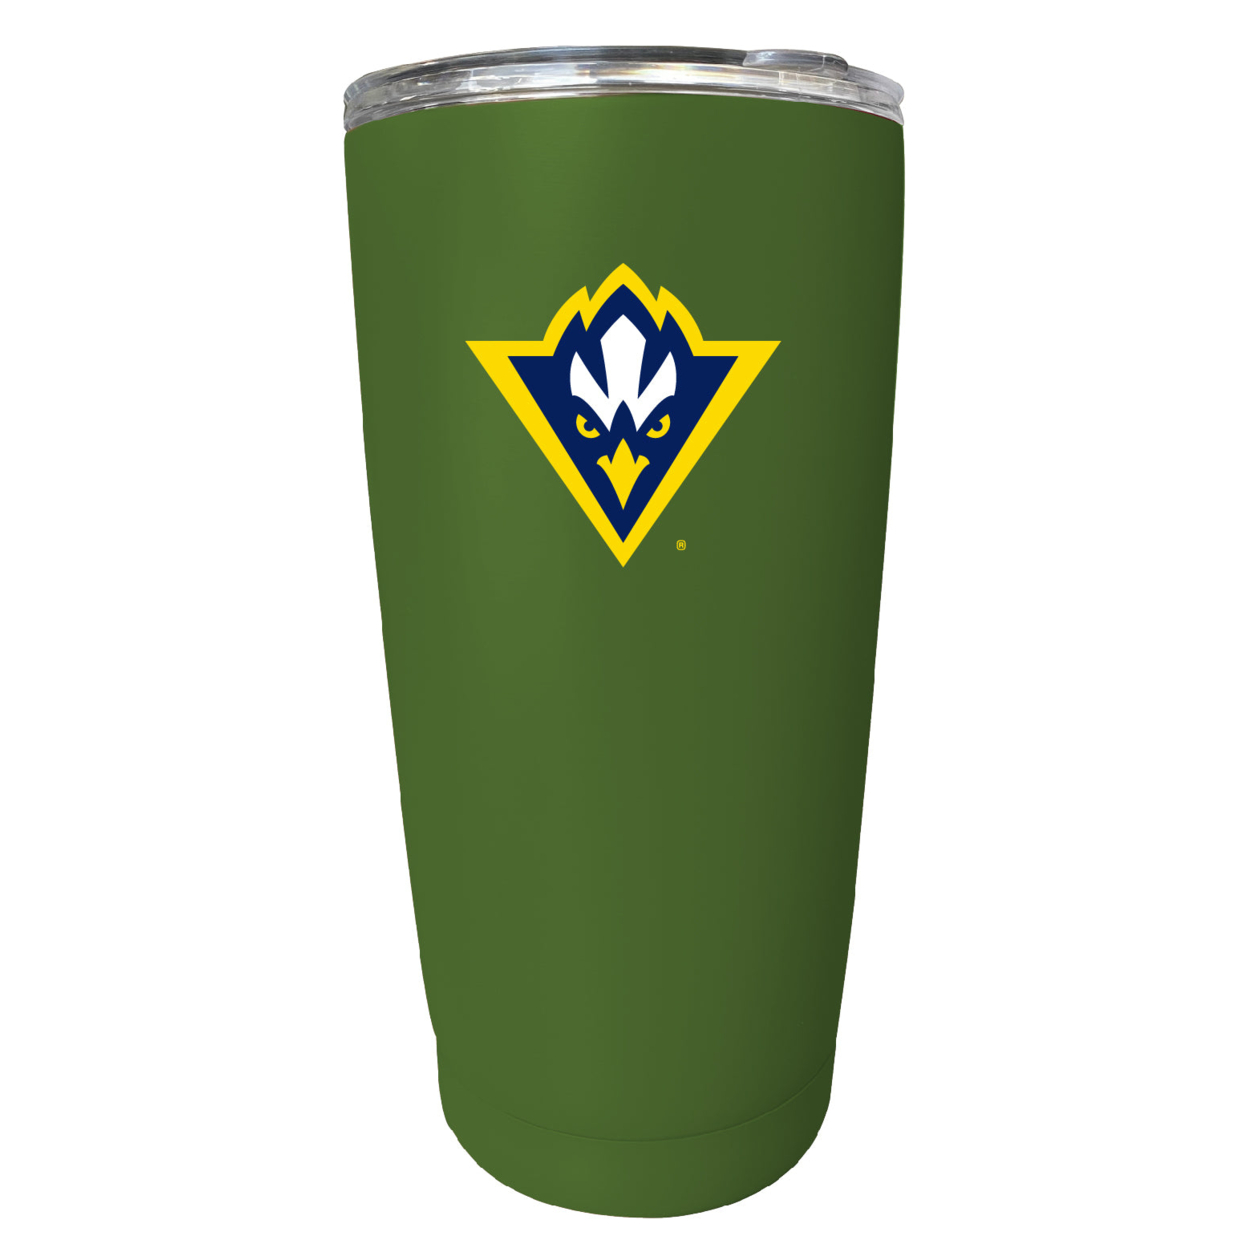 North Carolina Wilmington Seahawks 16 Oz Stainless Steel Insulated Tumbler - Gray